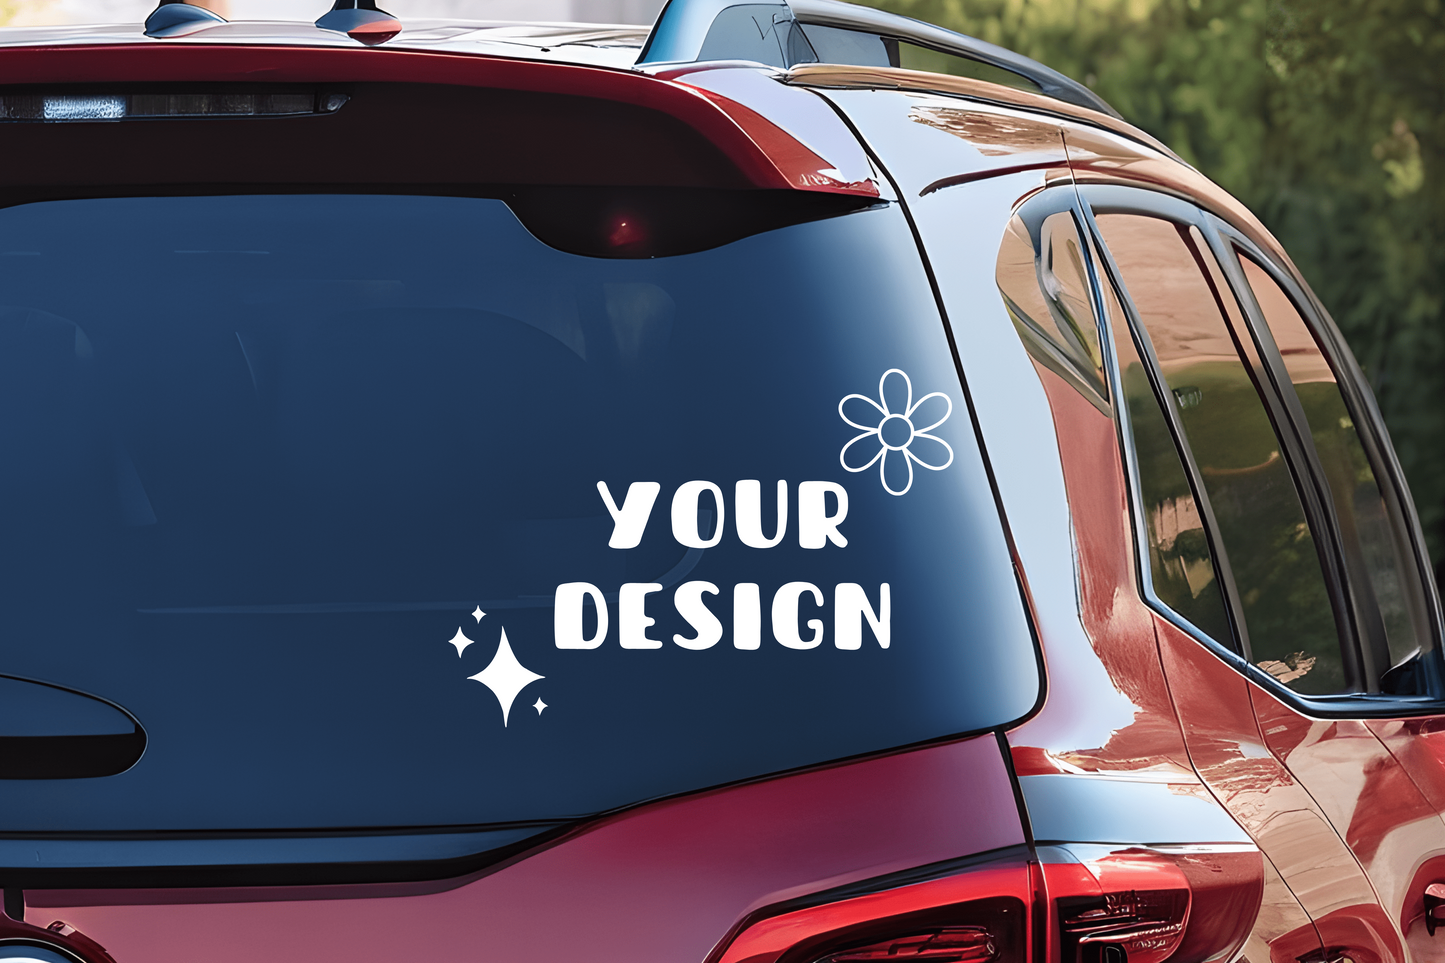 Vinyl decal  - Fully customizable/ image/ text